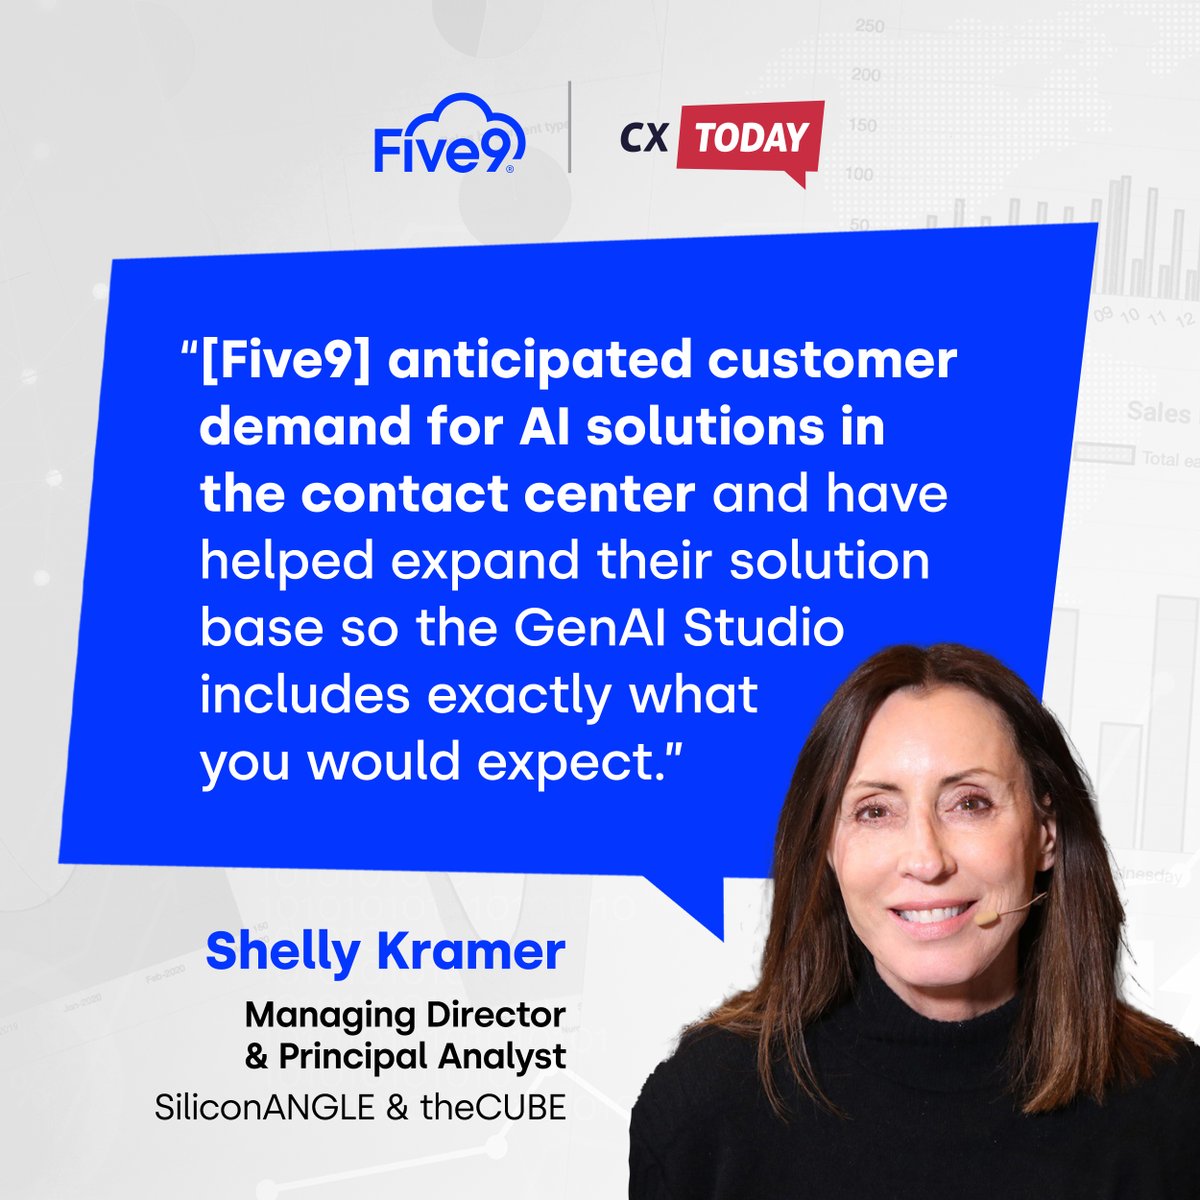 🚀 Five9 is ahead of the curve! 🚀 @ShellyKramer of @SiliconANGLE & @theCUBE notes that we’ve anticipated demand for AI in contact centers and expanded our solutions to meet it. Discover how Five9 is shaping the future of CX. #GenAI @cxtodaynews spr.ly/6017enEif